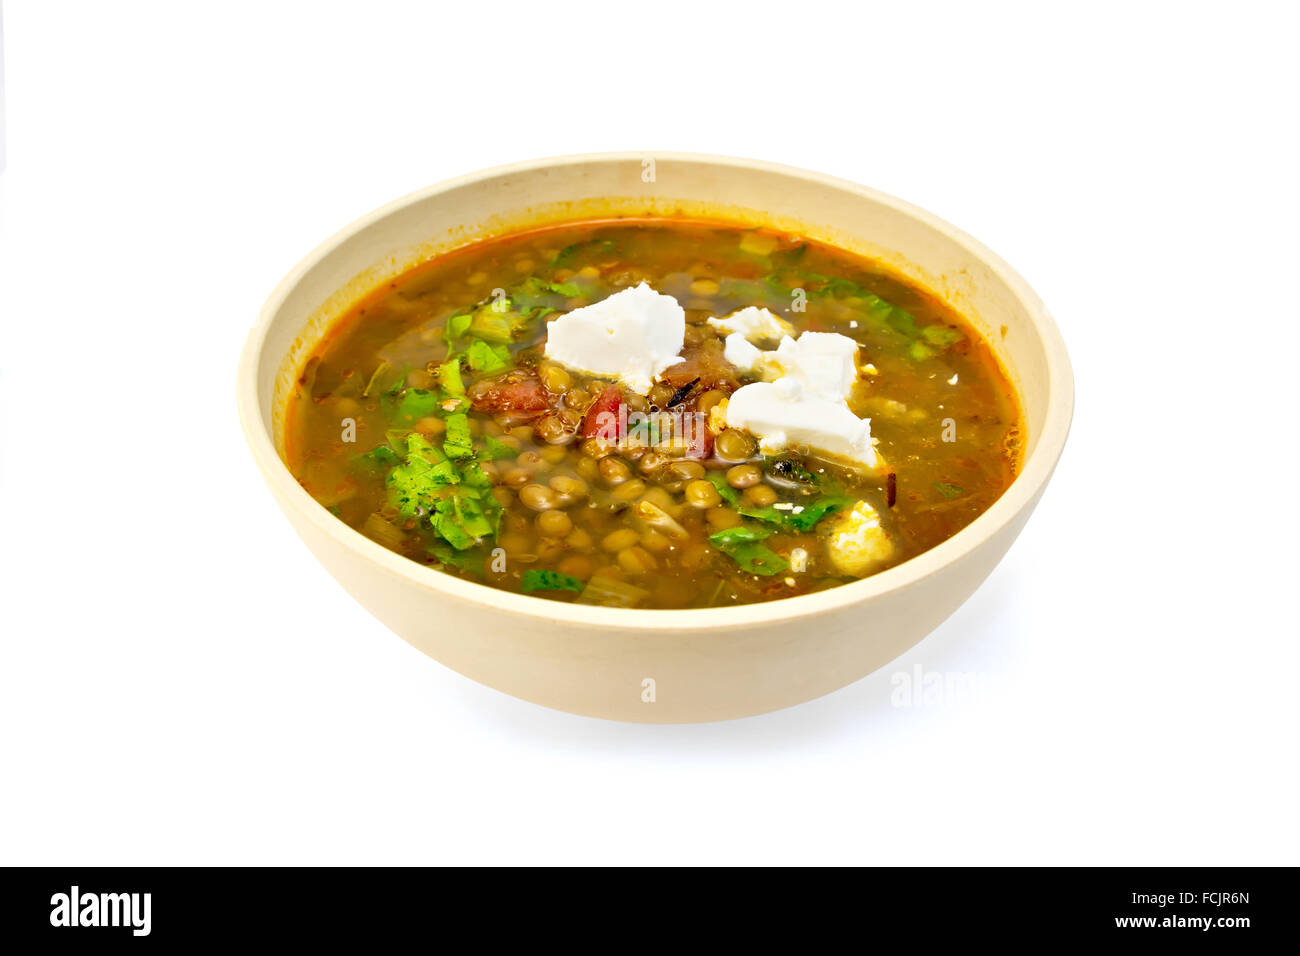 Lentil soup with spinach, tomatoes and feta cheese in a yellow dish isolated on white background Stock Photo